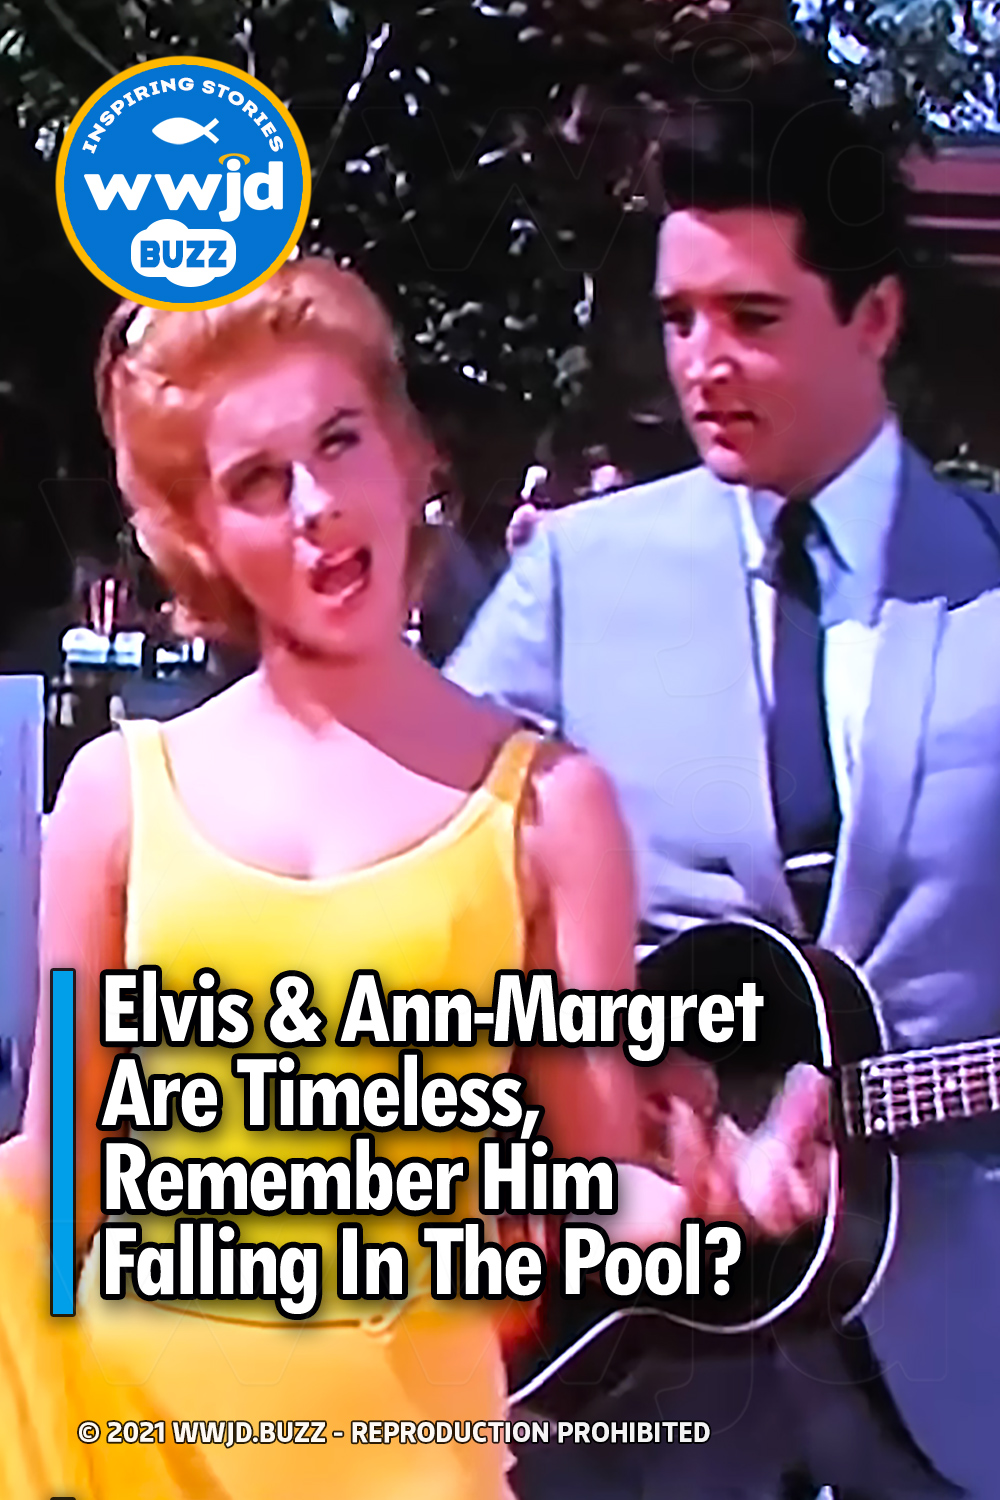 Elvis & Ann-Margret Are Timeless, Remember Him Falling In The Pool?